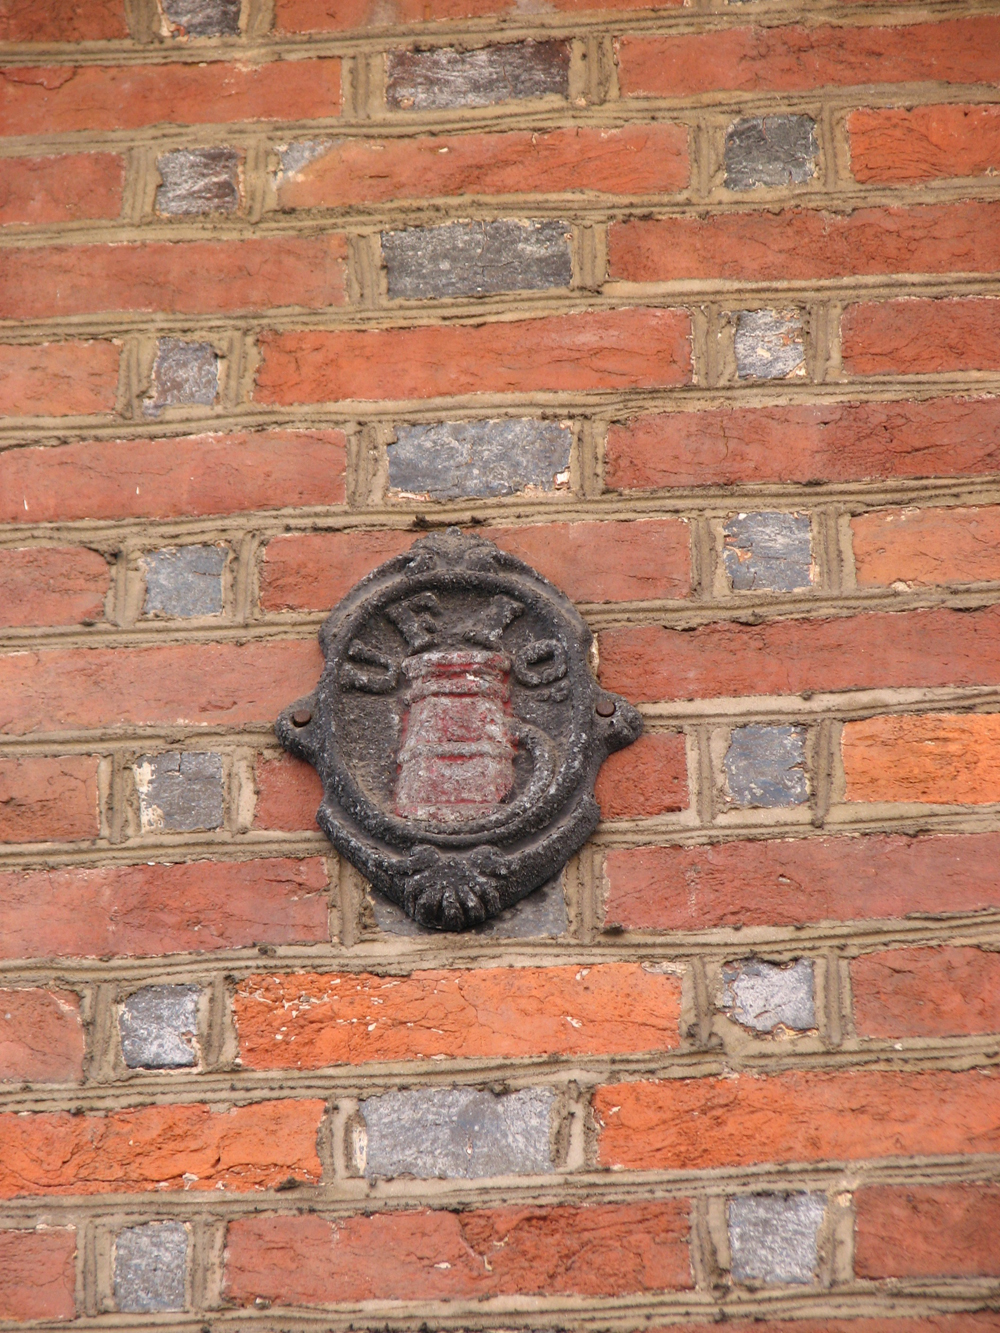 Many of the original fire insurance company plaques can be found on the homes.